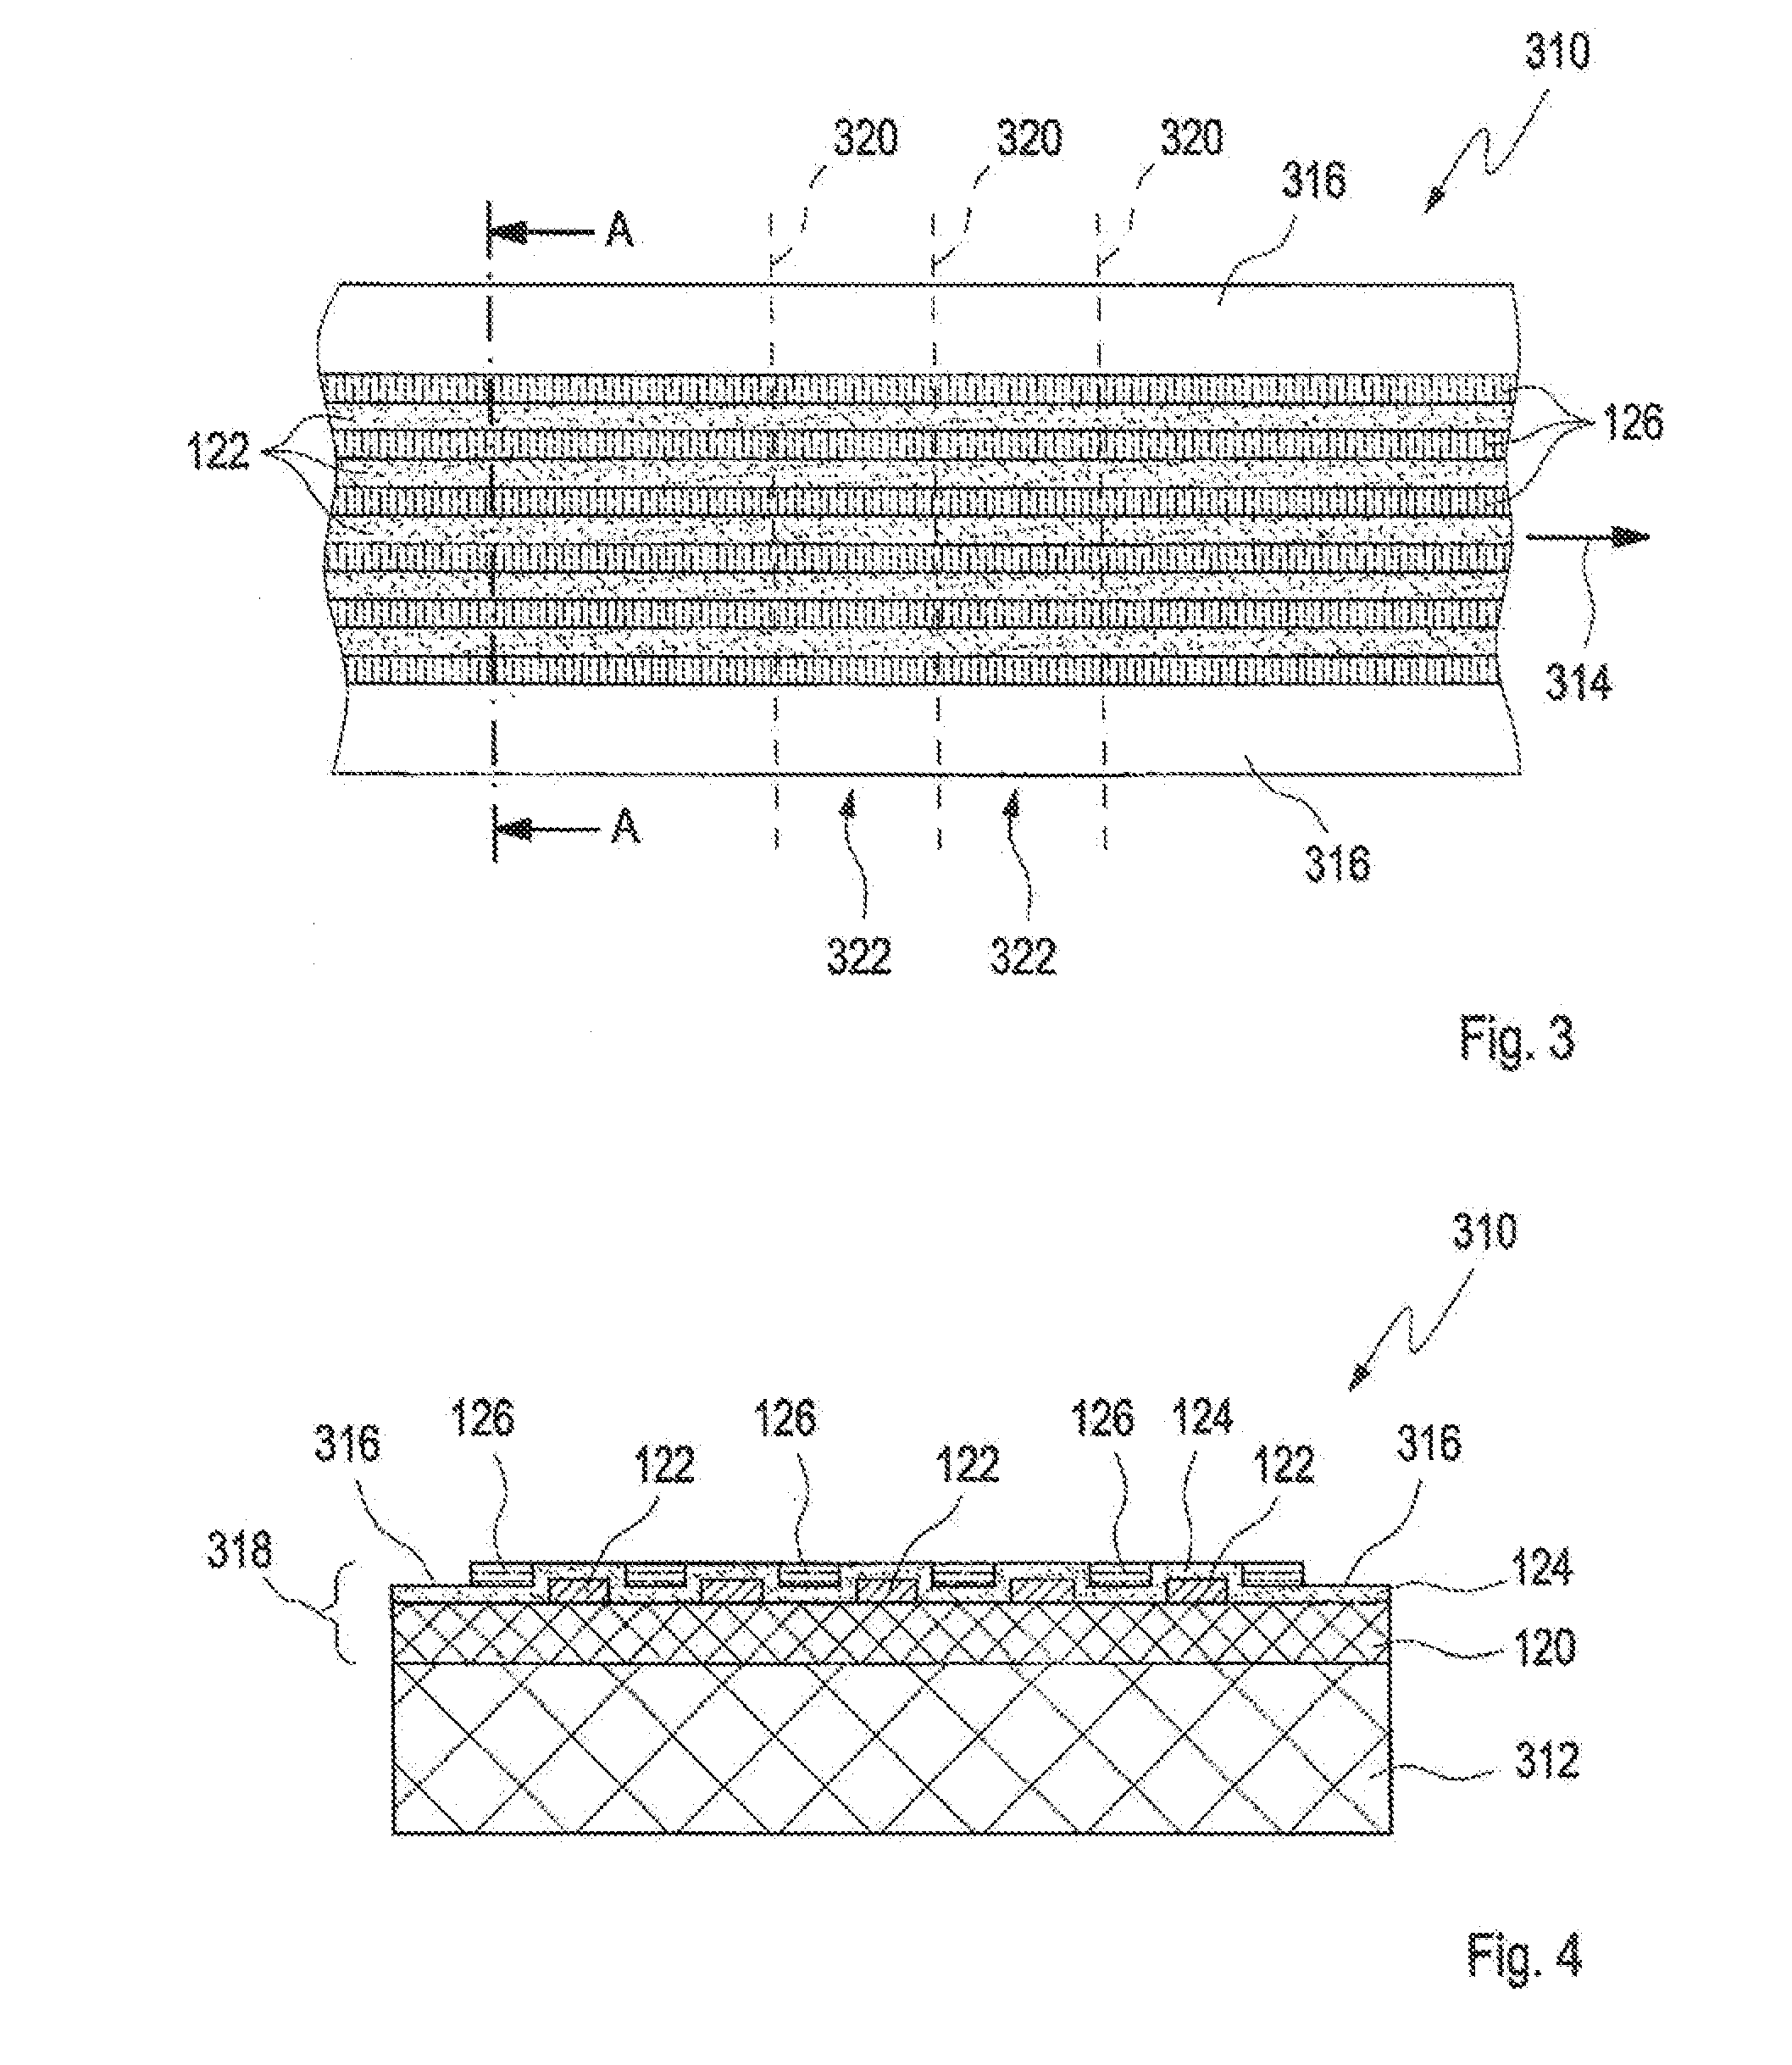 Method for producing a tape product having diagnostic aids